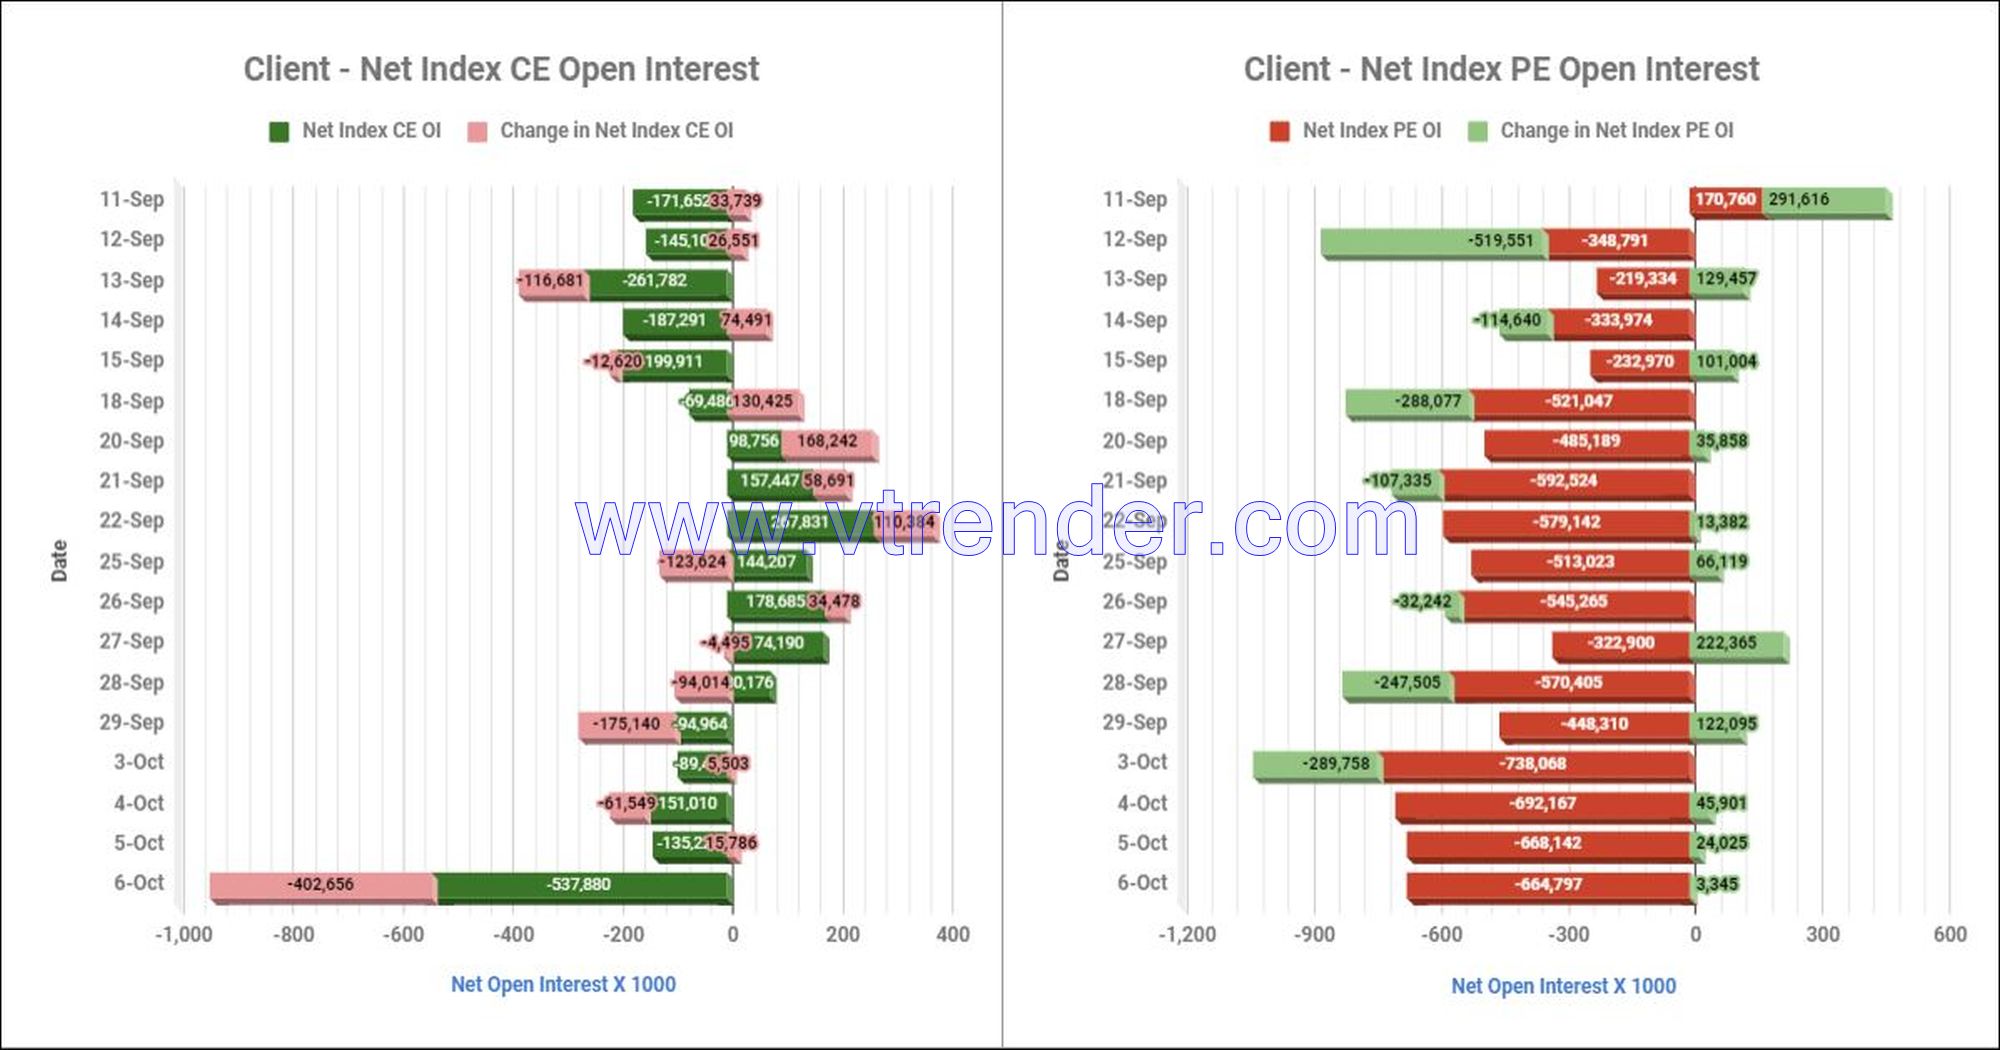 Clientinop06Oct Participantwise Net Open Interest And Net Equity Investments – 6Th Oct 2023 Ce, Client, Dii, Fii, Index Futures, Index Options, Open Interest, Pe, Prop, Stocks Futures